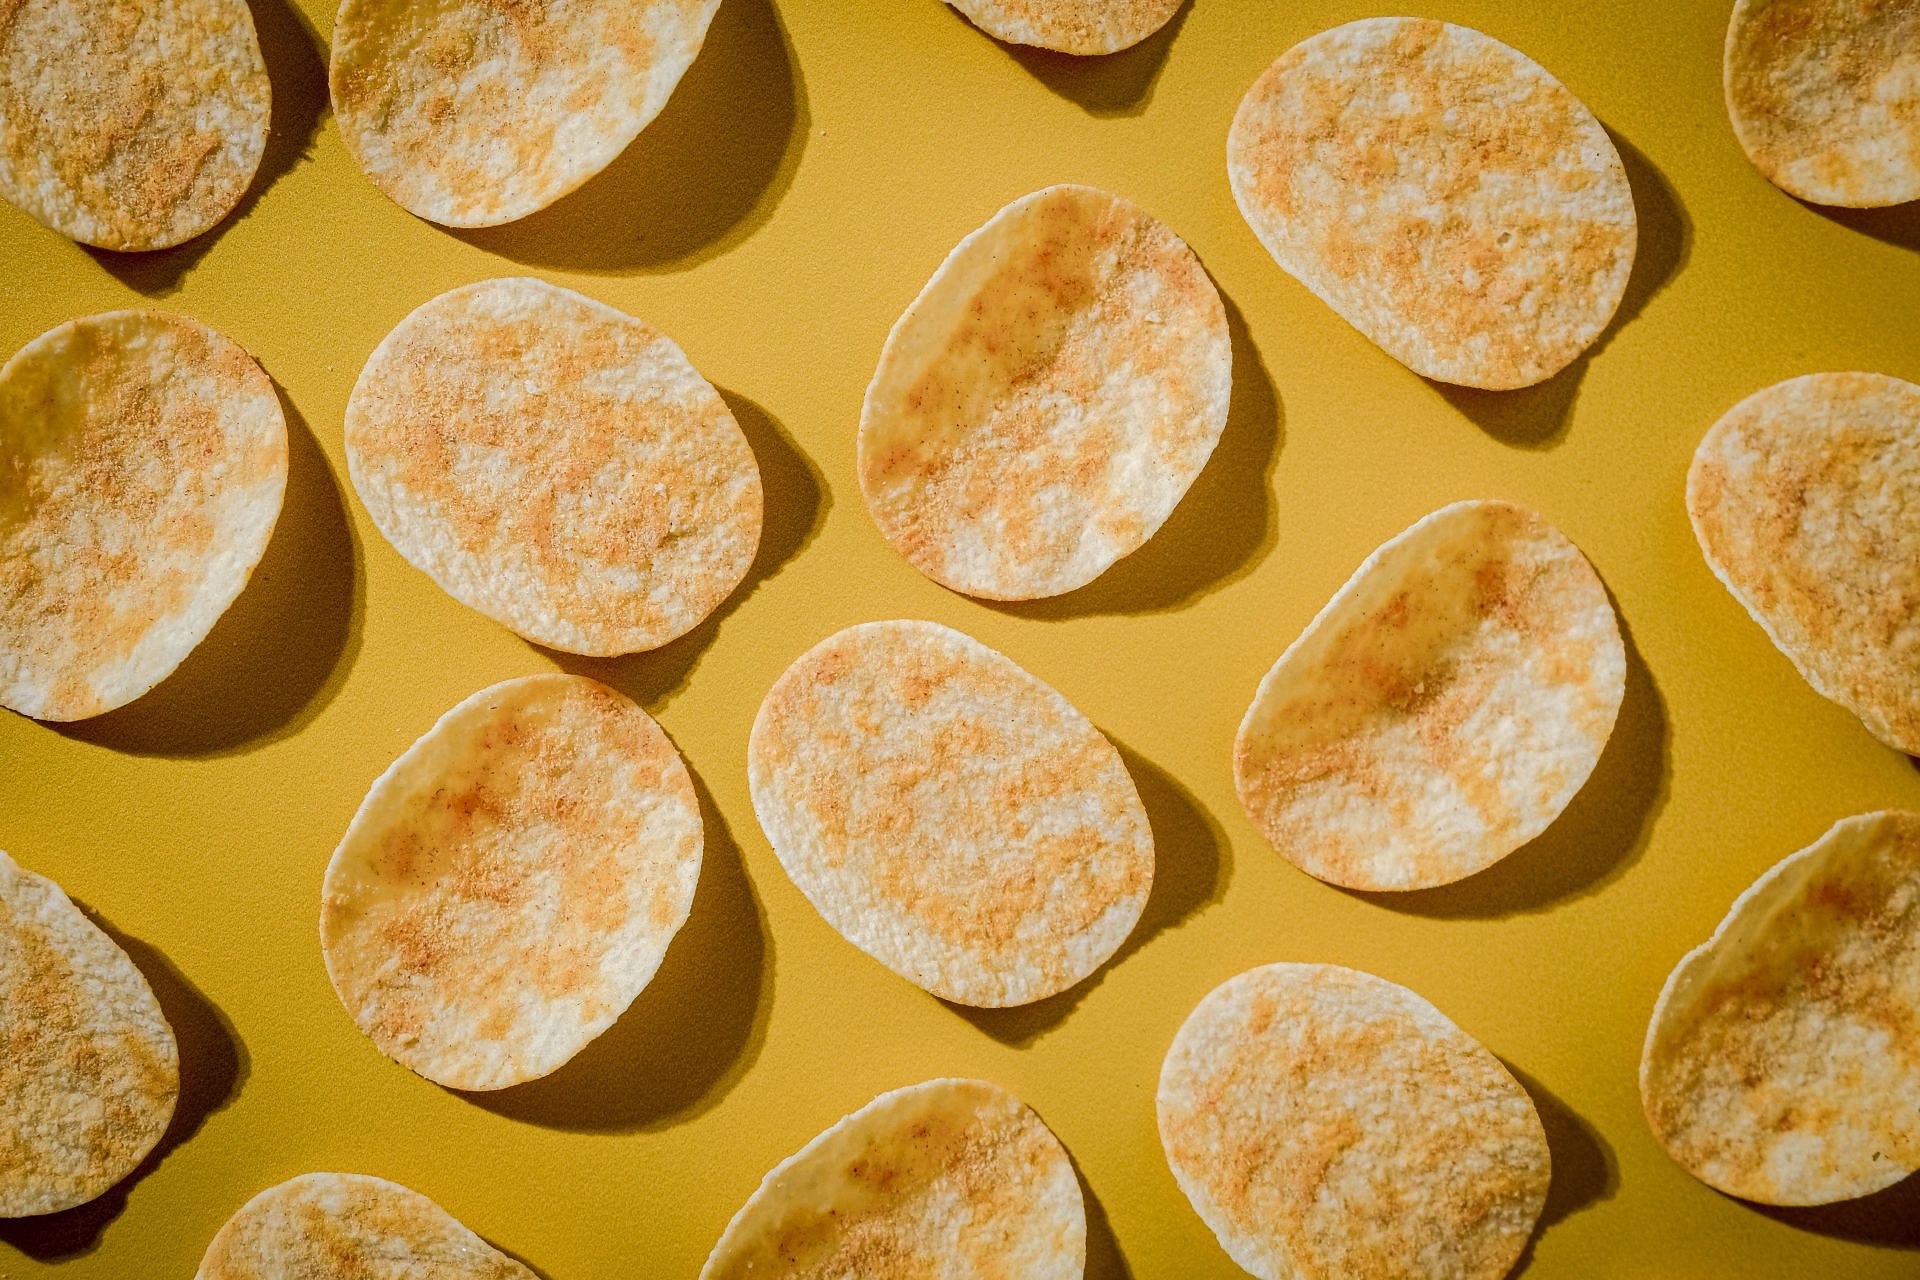 Are healthy potato chips even real? (Image by Jeff Siepman/Unsplash)